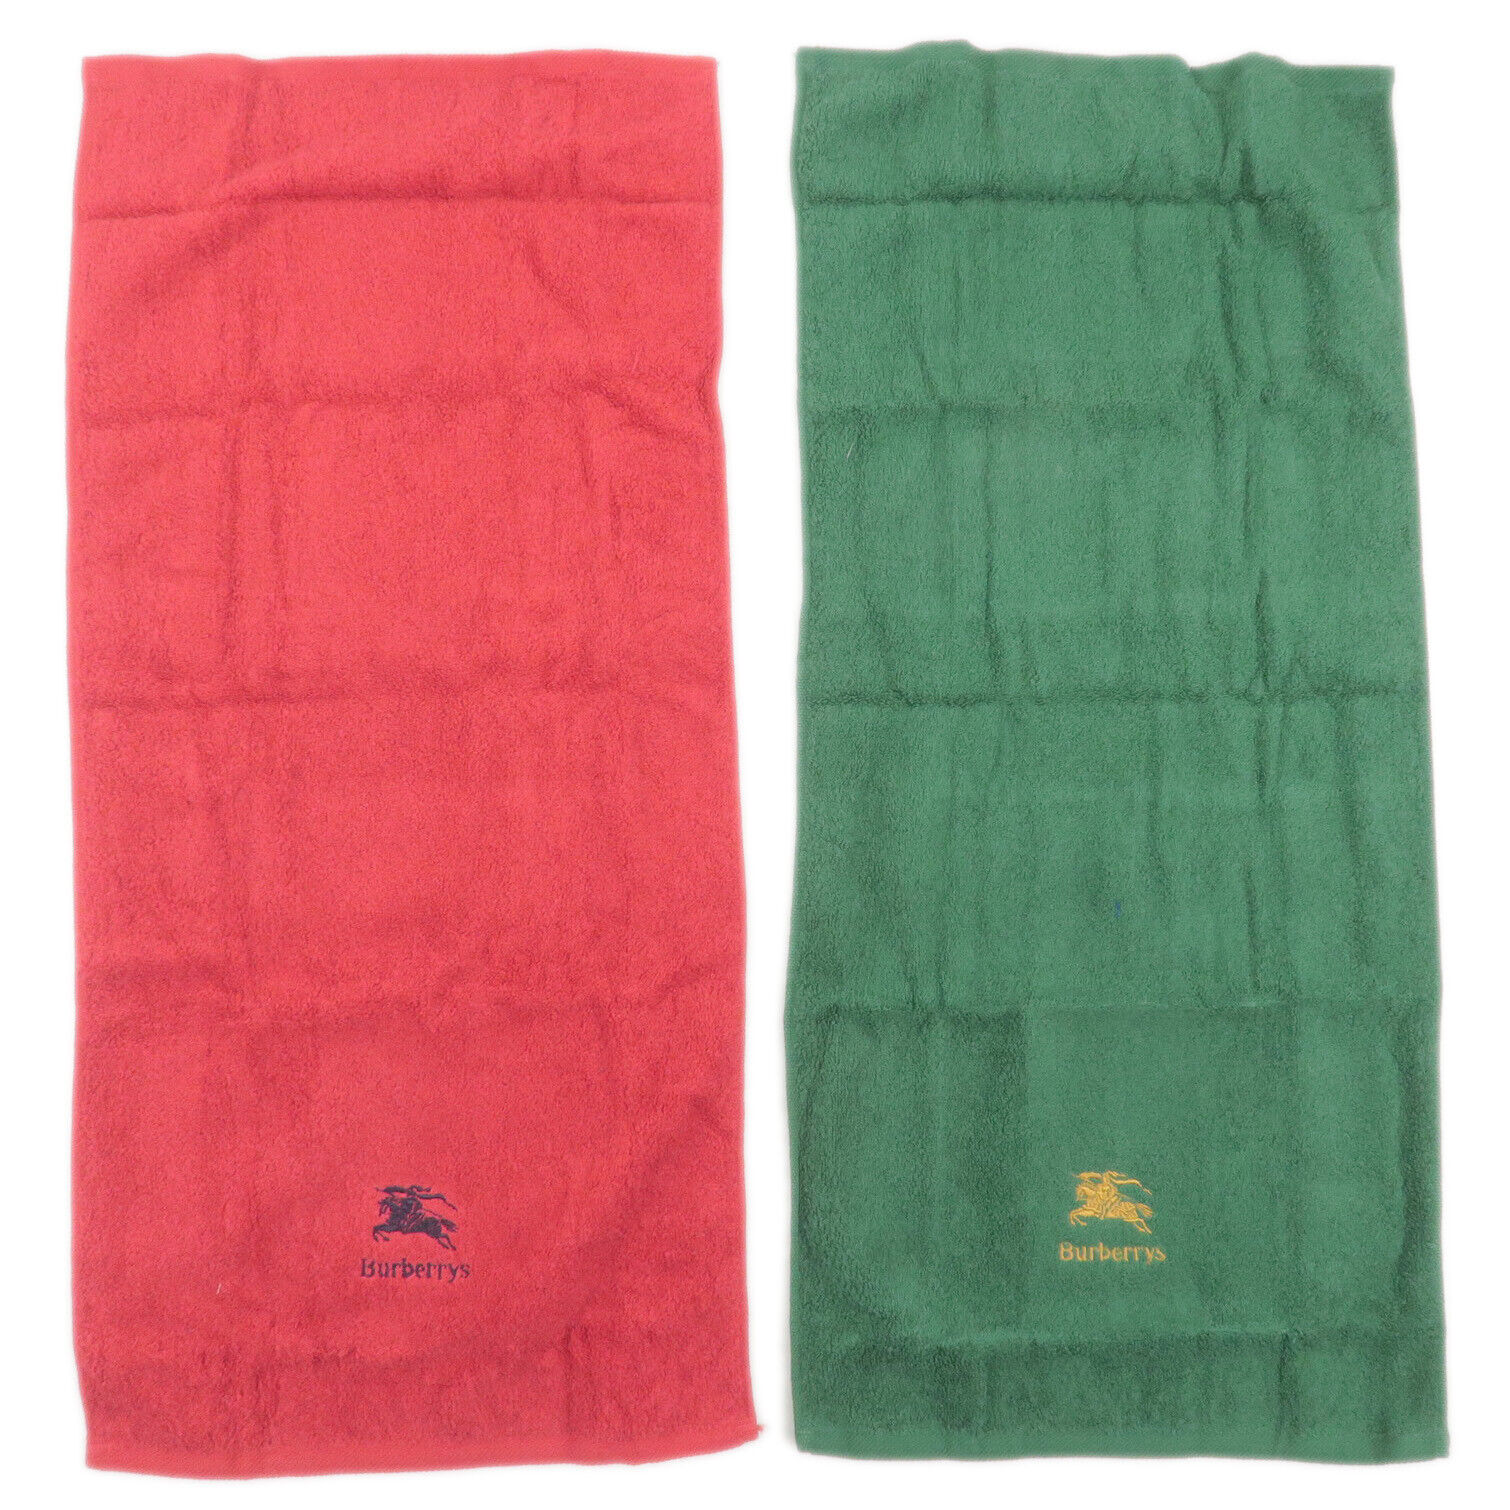 Authentic BURBERRY Towel Set Small Towel 100% Cotton Red Green Used F/S